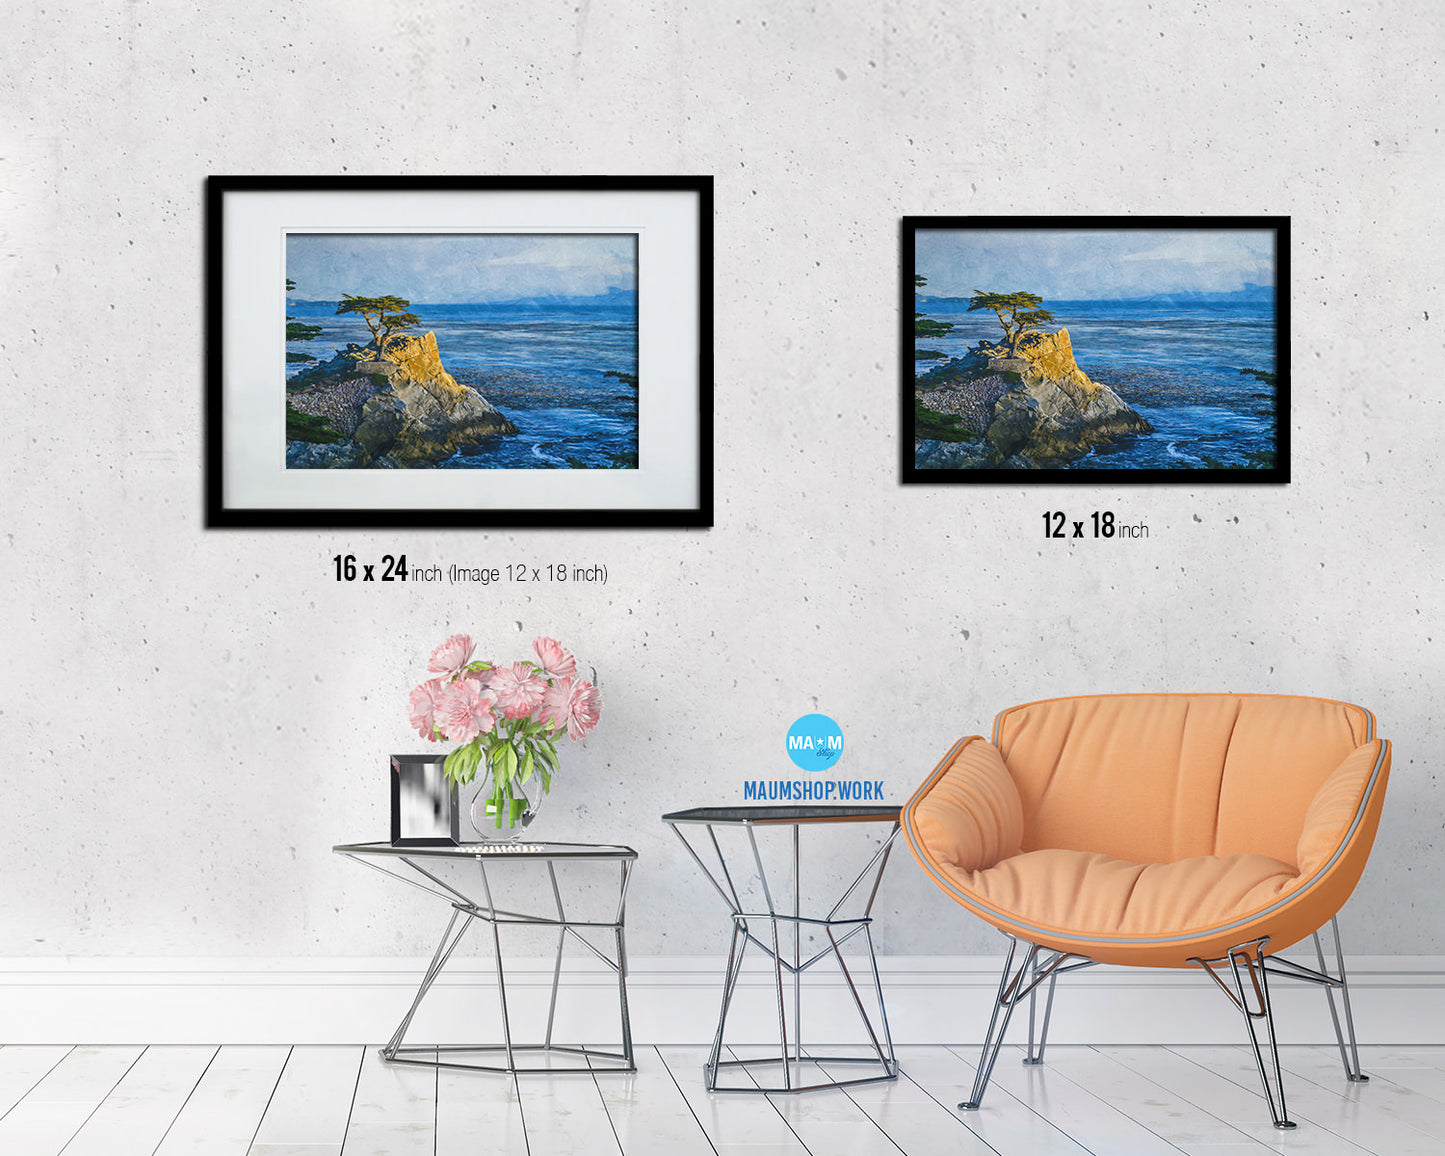 Monterey, California, Lone CypressTree Landscape Painting Print Art Frame Home Wall Decor Gifts